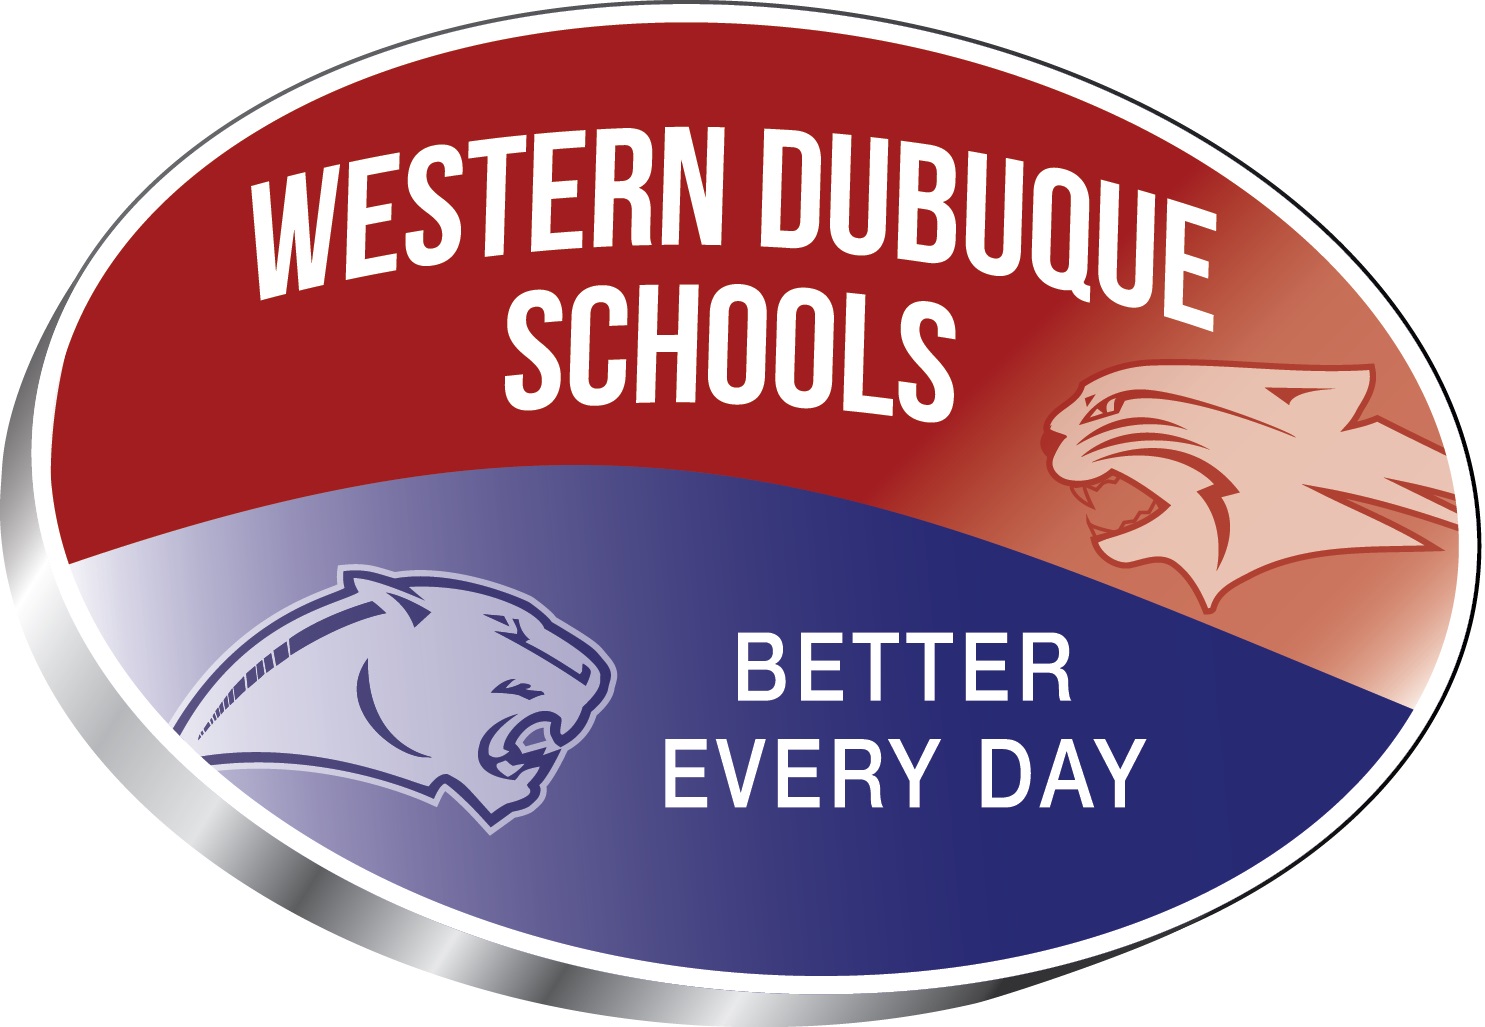 Western Dubuque Schools - Better Every Day